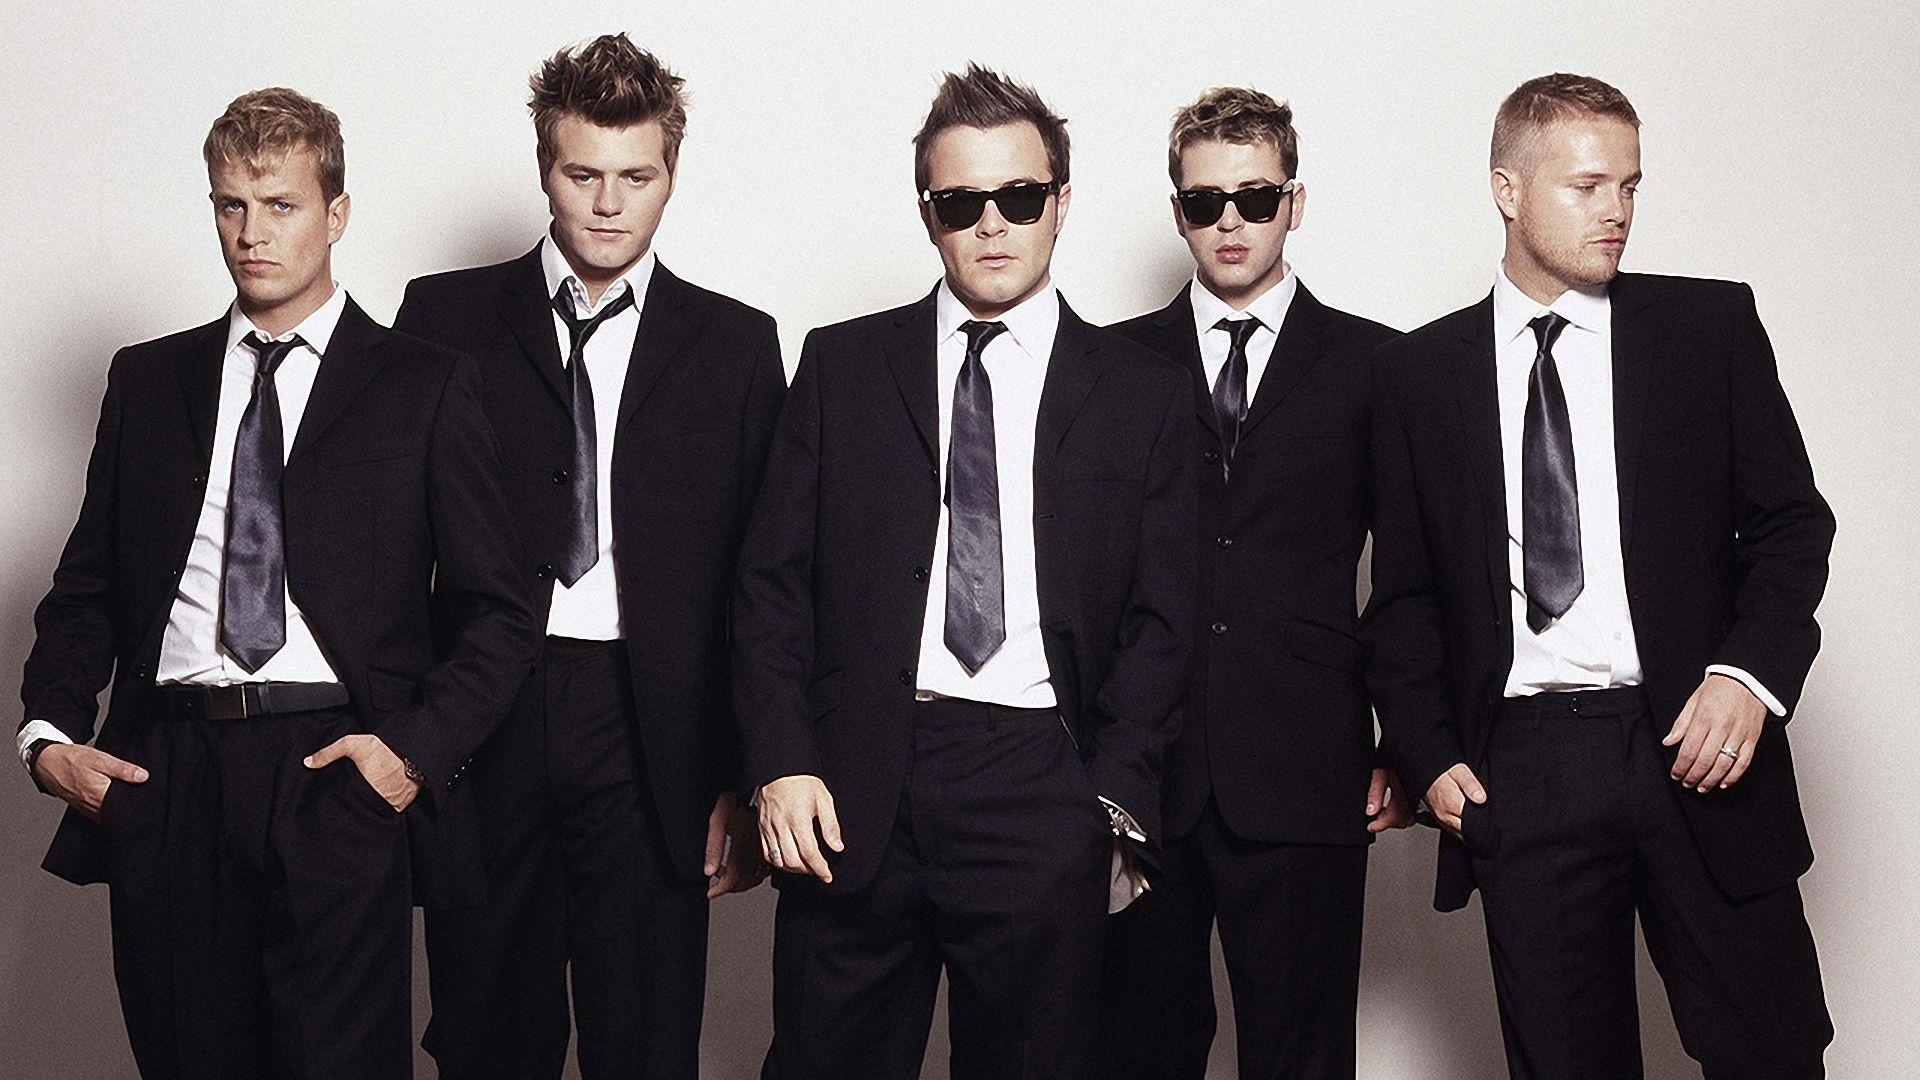 Werecoyote24 image westlife HD wallpaper and background photo